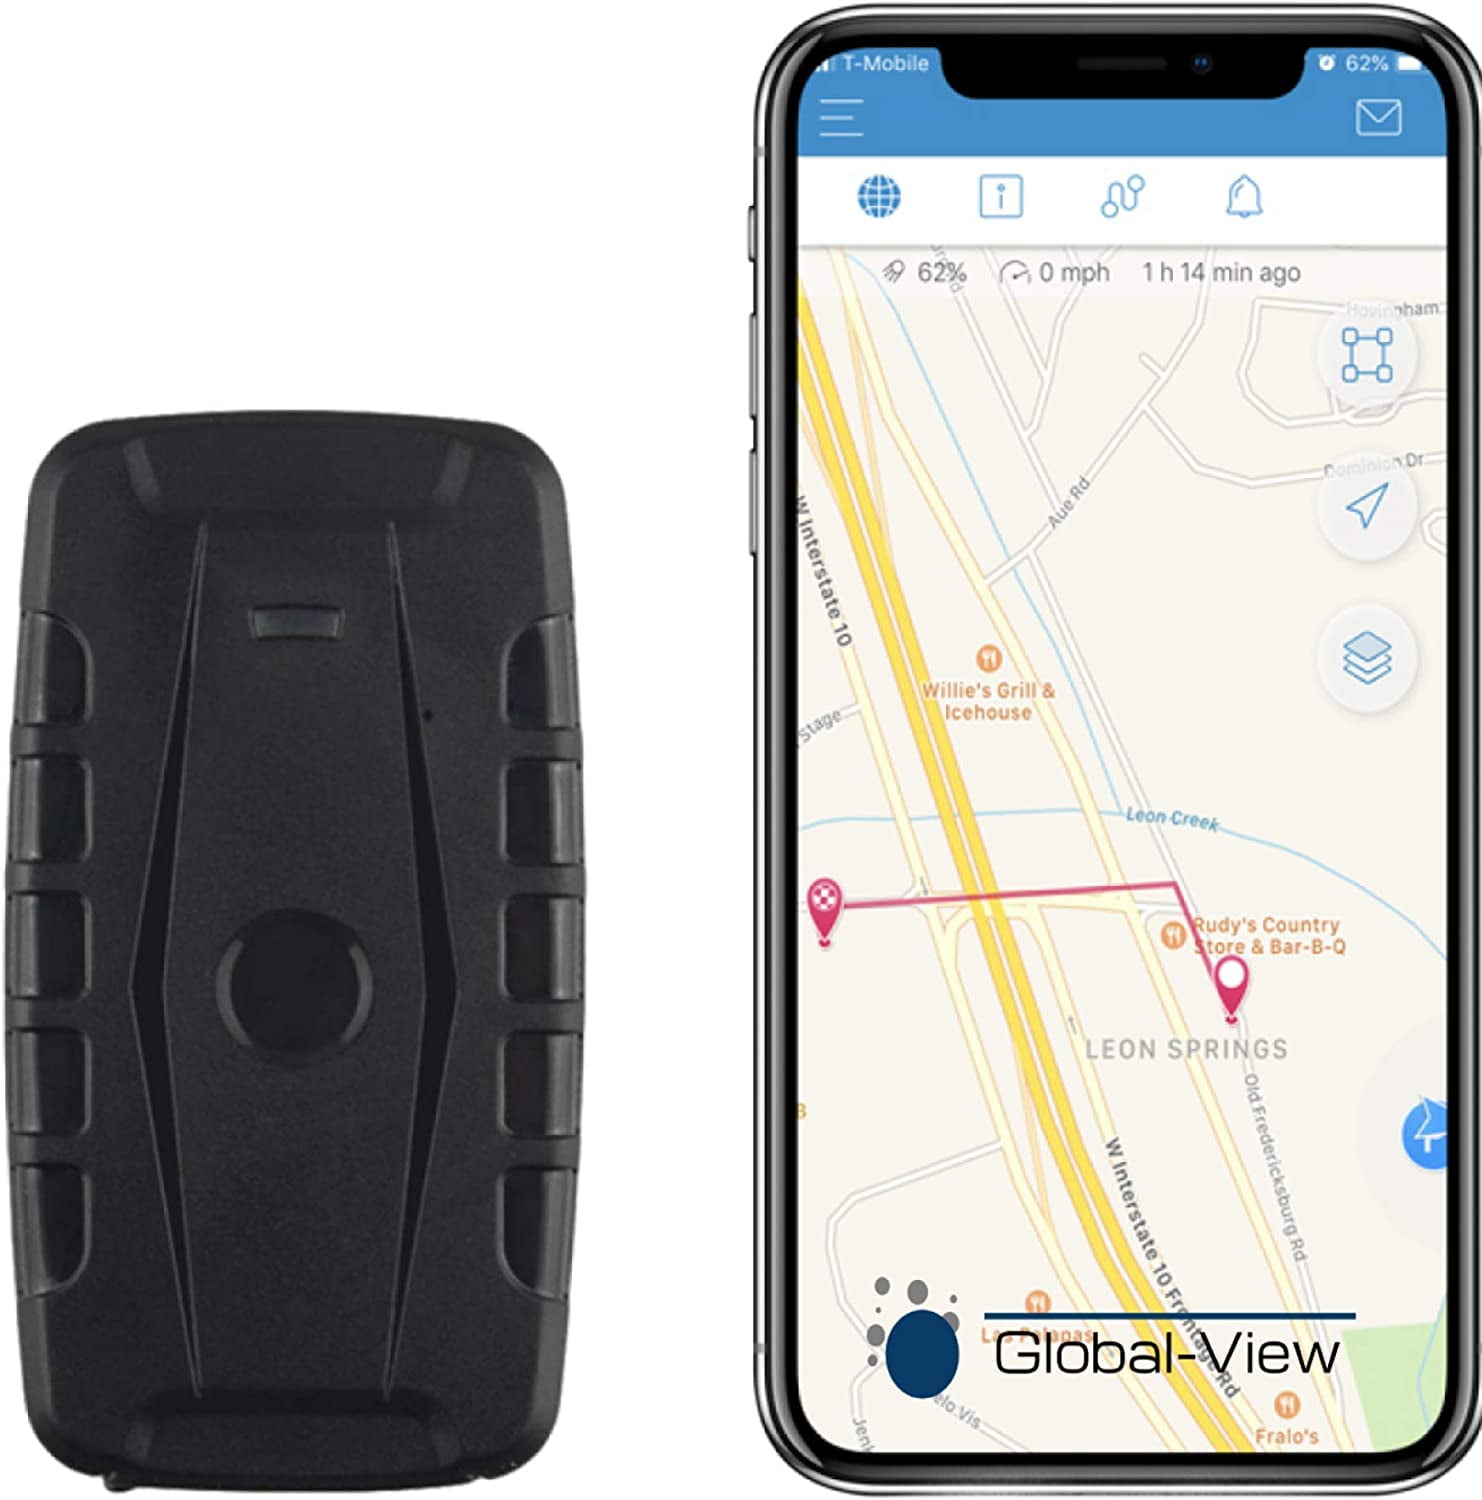 Human Gps Tracker Automobile Tracking Location Accurate Positioning  Location - Buy Pet Gps Tracker,Location Navigator,Gps Tracker Gf 07 Product  on Alibaba.com